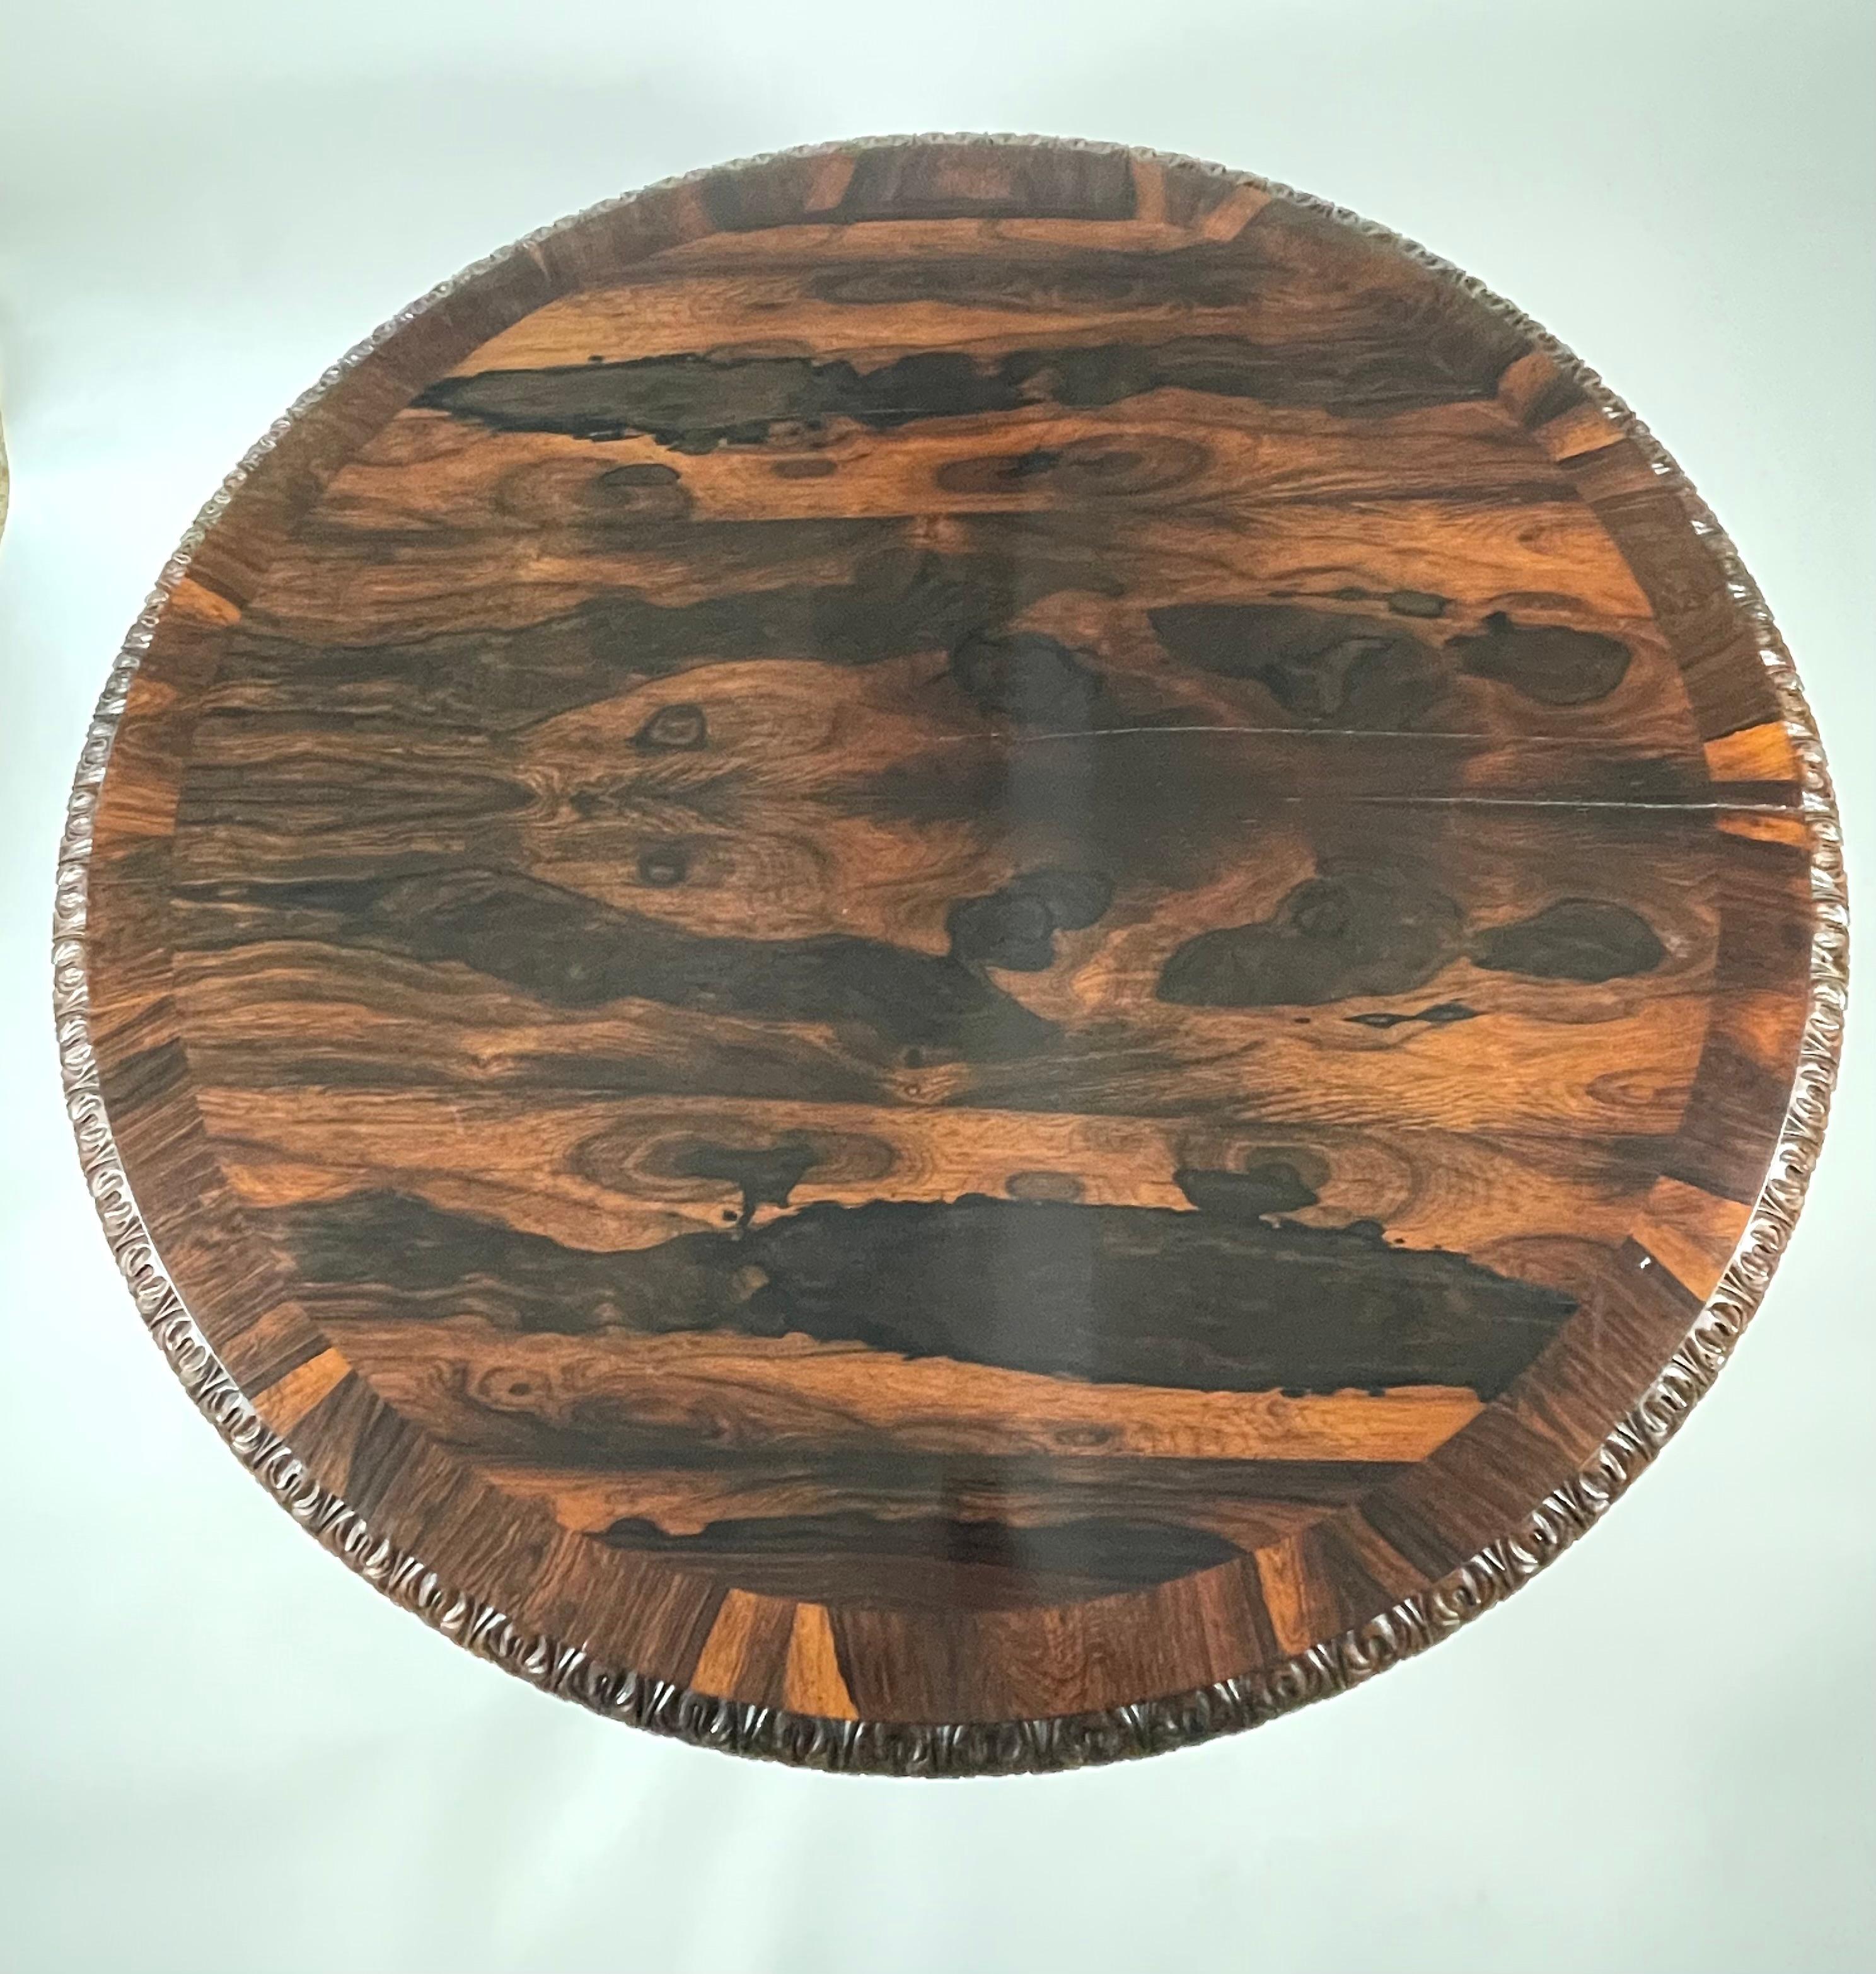 A fine quality, generously proportioned William IV rosewood center or dining table, the round top showcasing the extraordinary color and figure of the lively wood grain. It is edged with carved acanthus leaf decoration, supported by a pedestal with